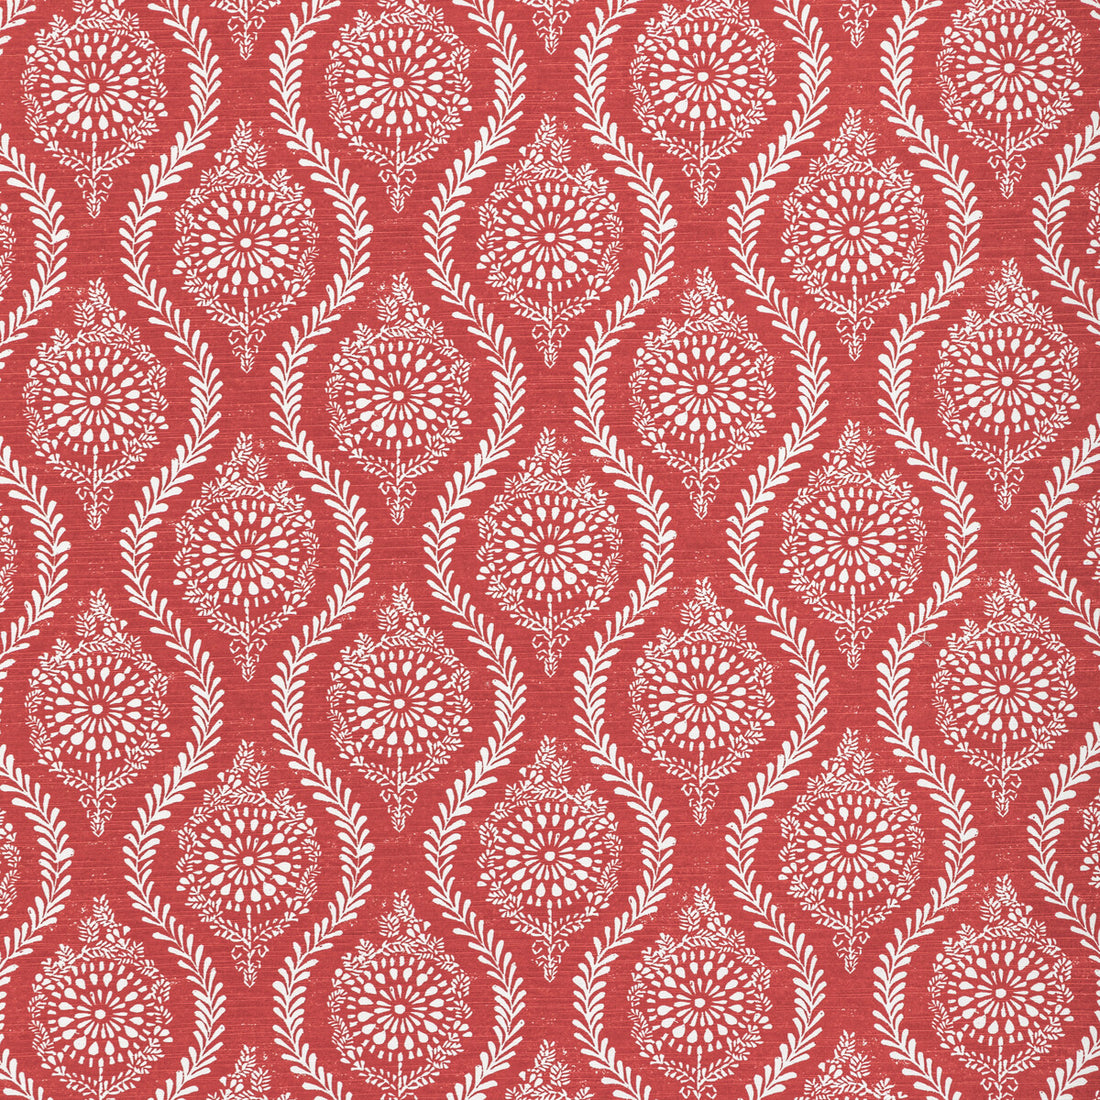 Marindol Print fabric in red color - pattern 8022105.19.0 - by Brunschwig &amp; Fils in the Manoir collection